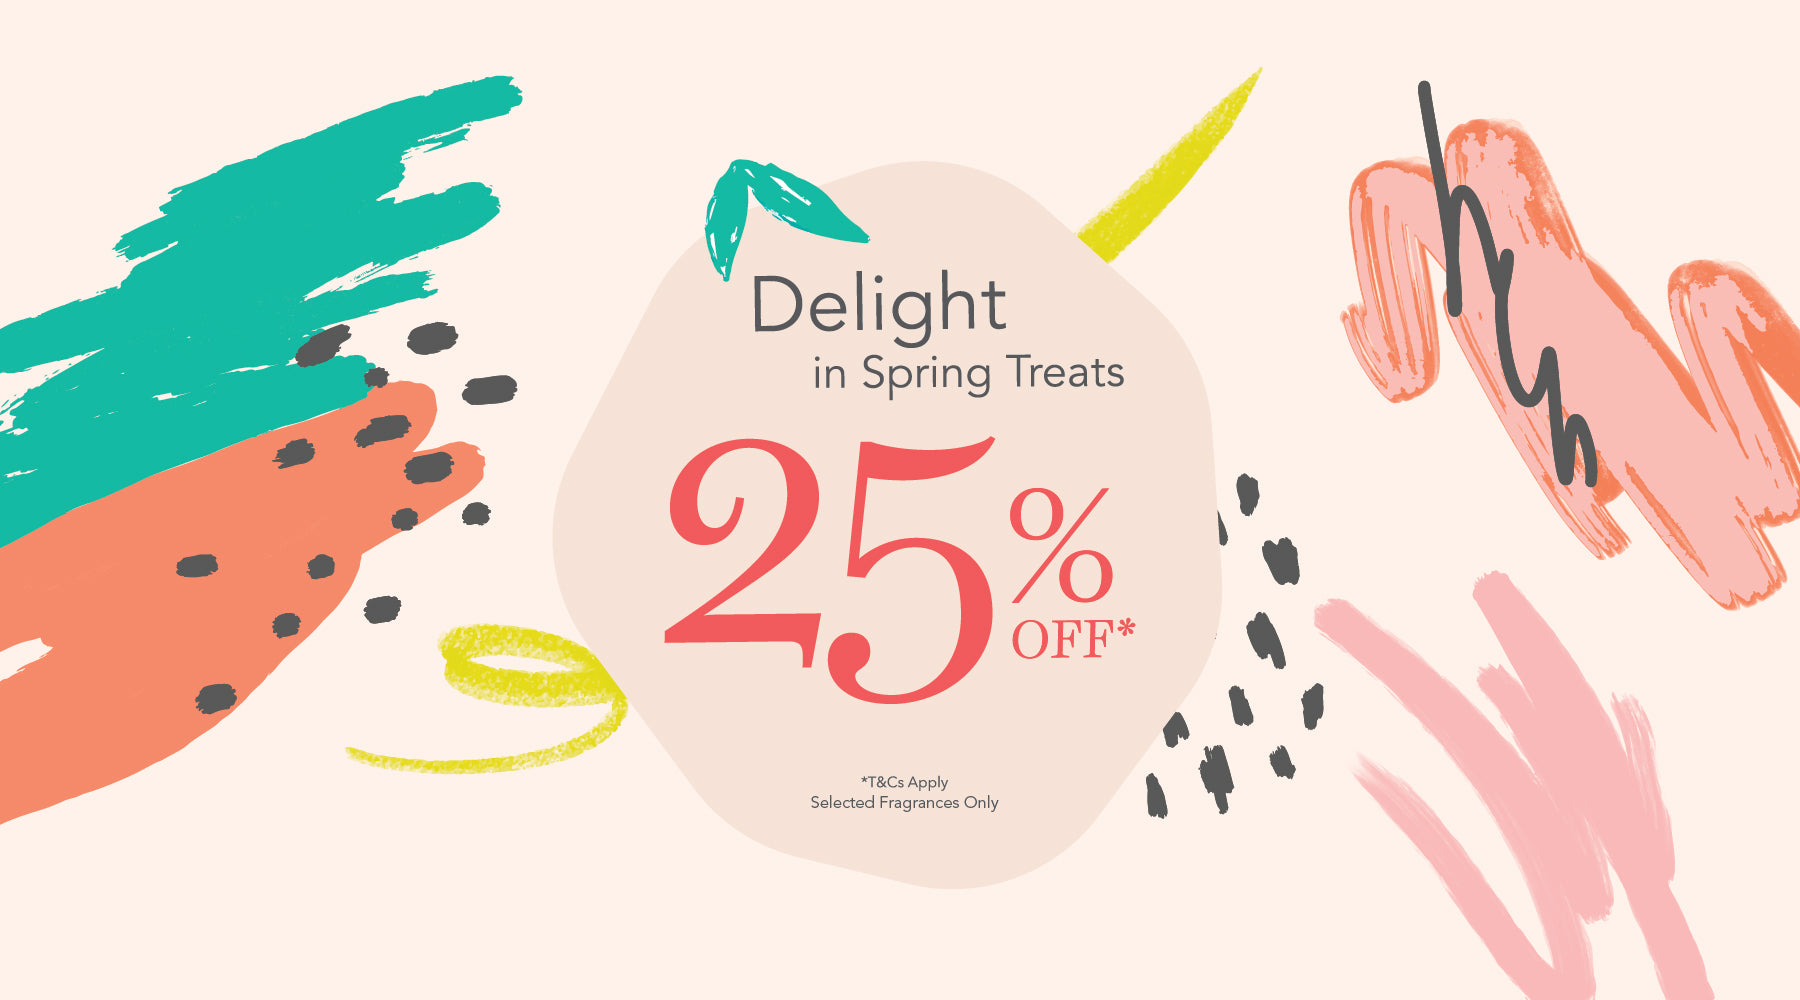 Delight In Spring Treats This March!